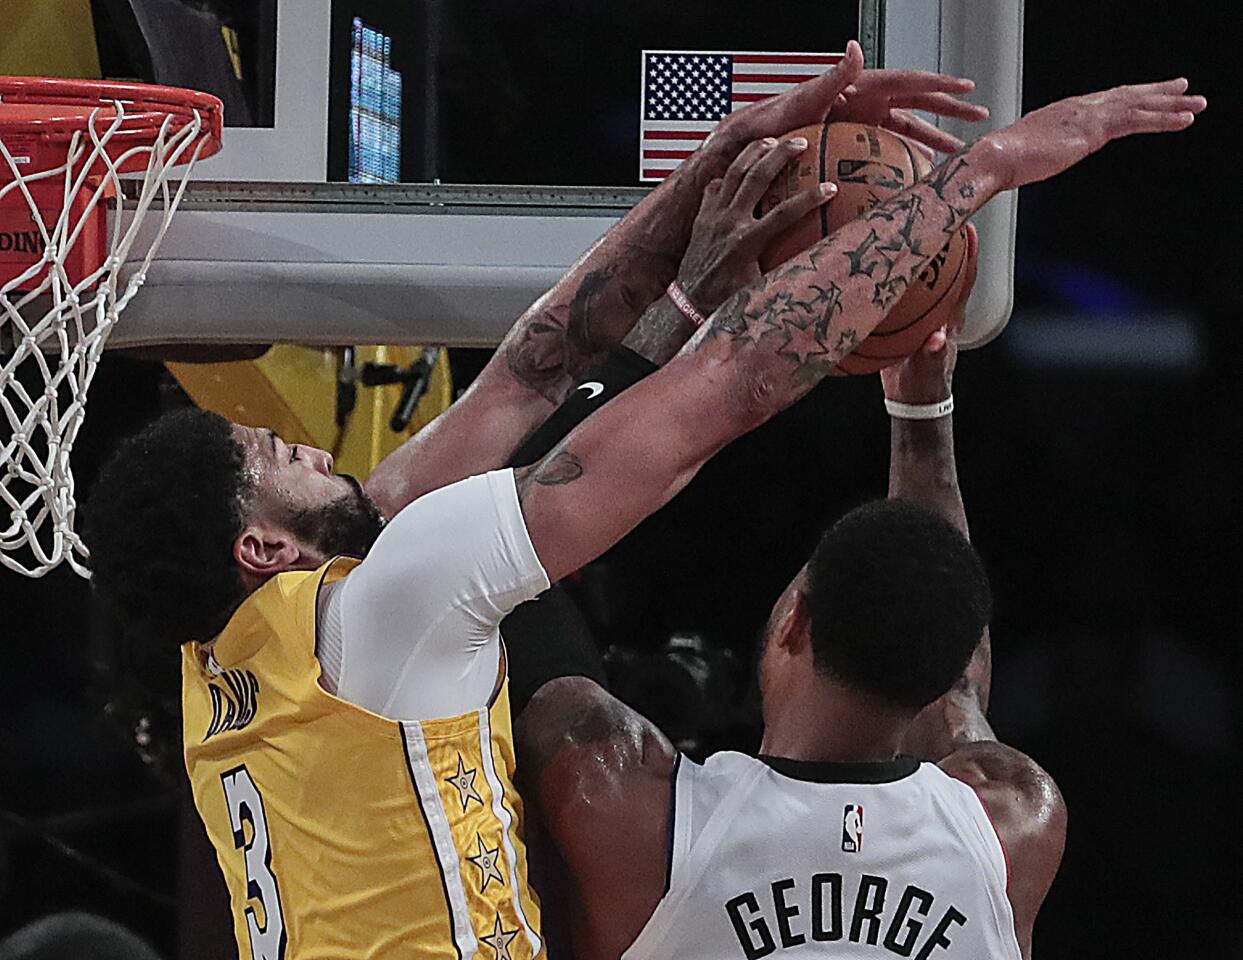 Lakers forward Anthony Davis (3) blocked a shot by Clippers forward Paul George during the first half.